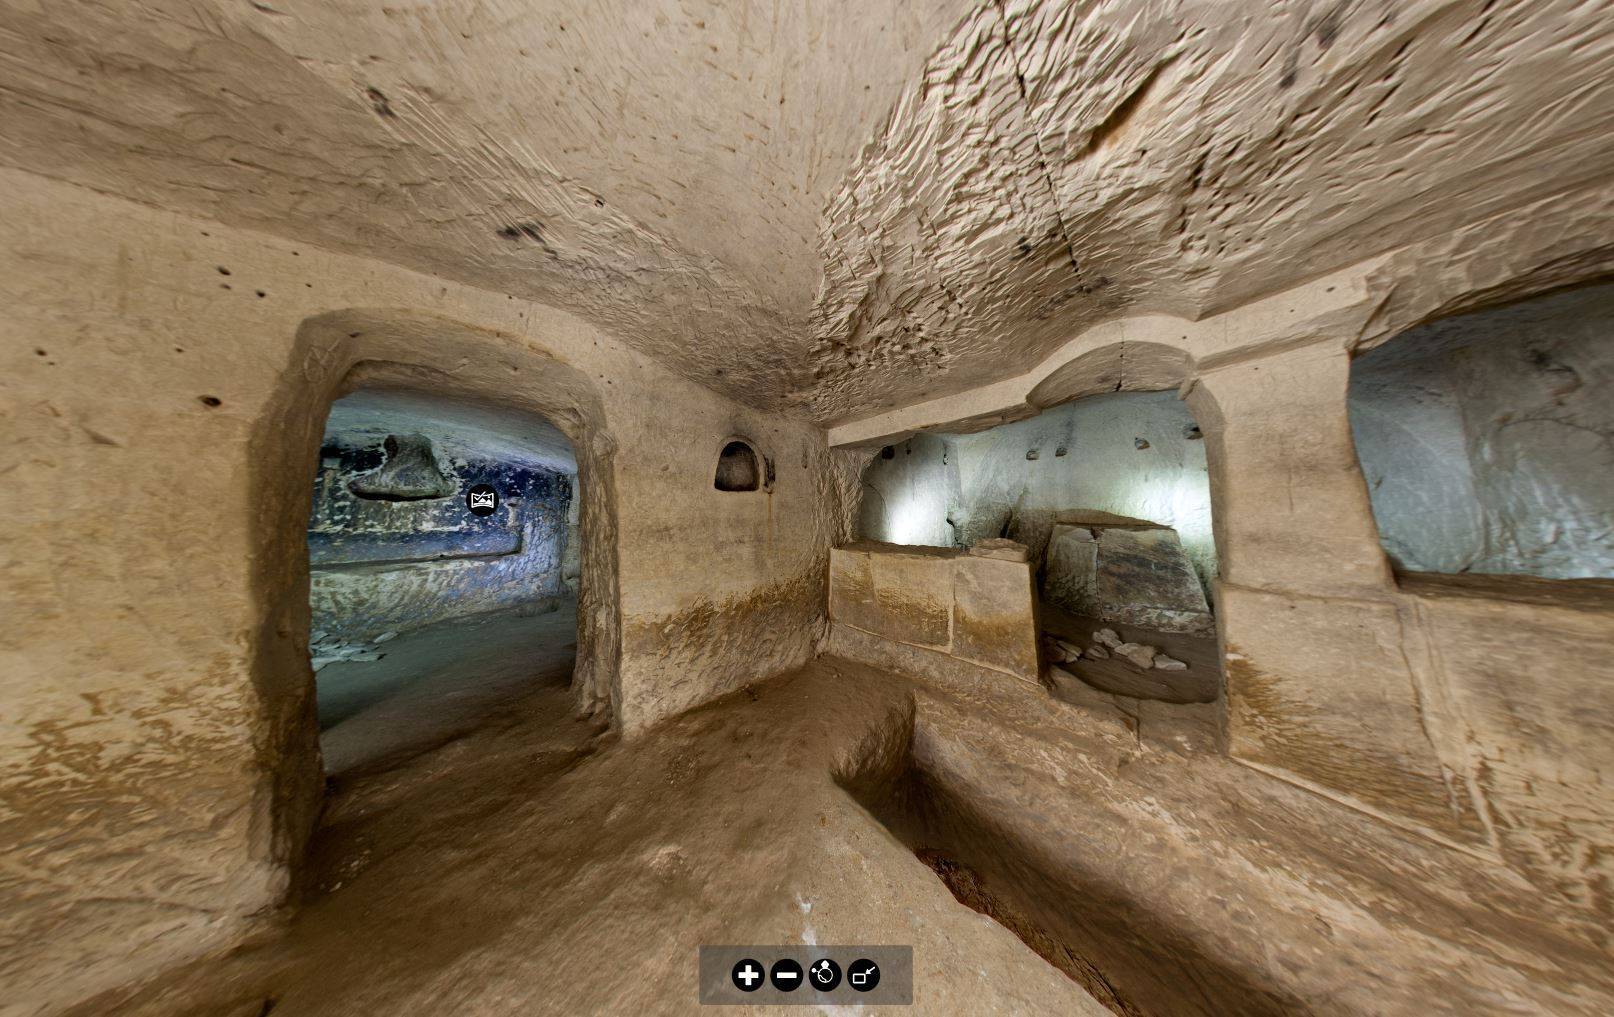 The Tomb of Salome carved out of the limestone below ground in Beit Lehi, Israel